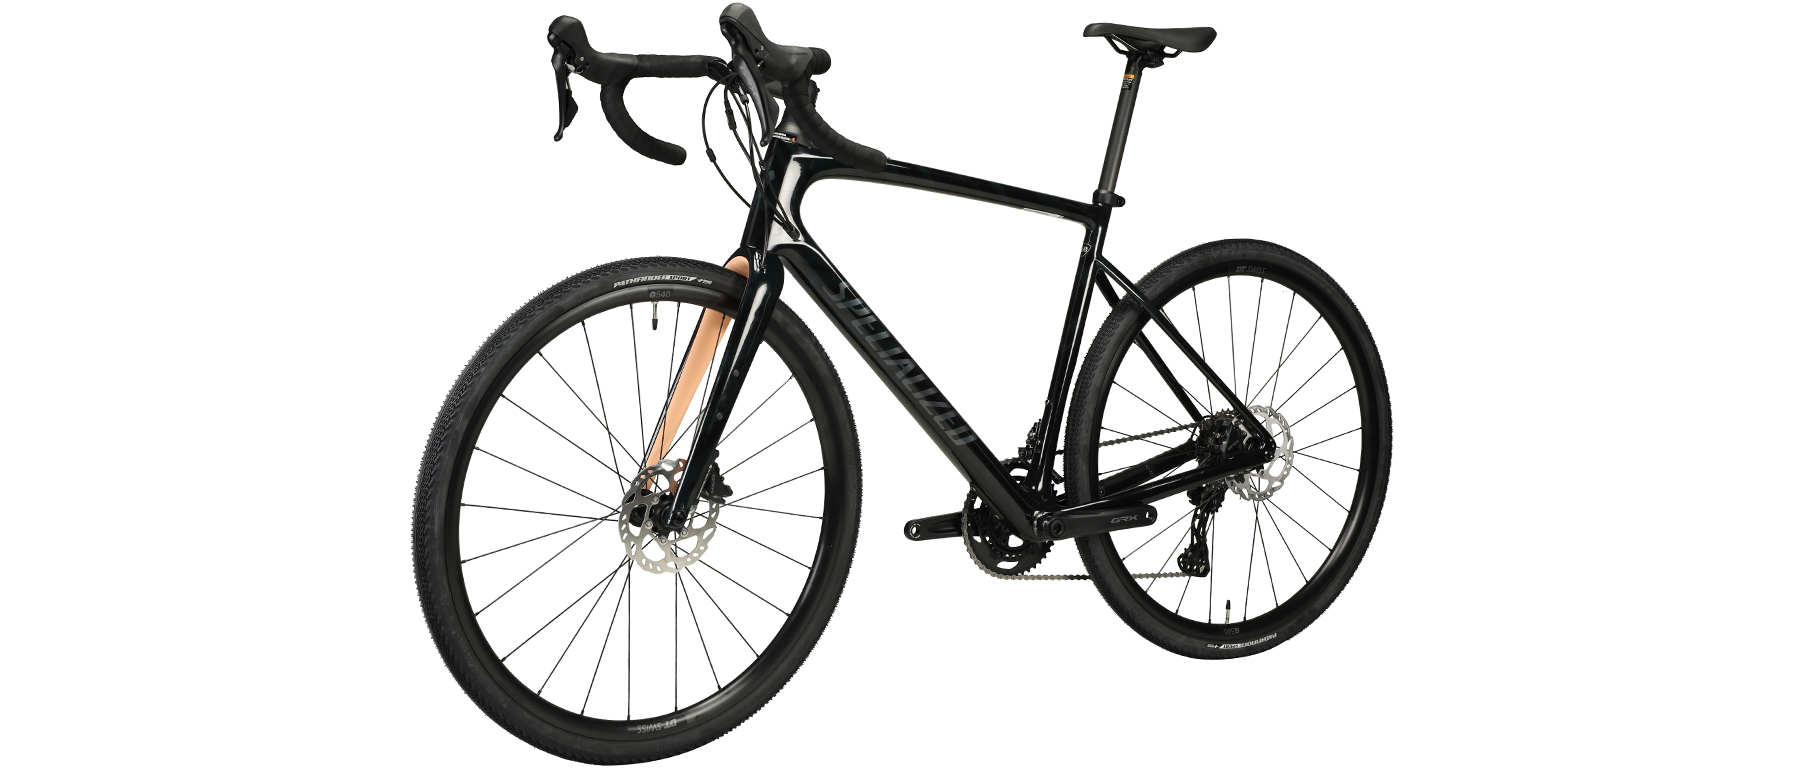 Specialized Diverge Sport Carbon Bicycle